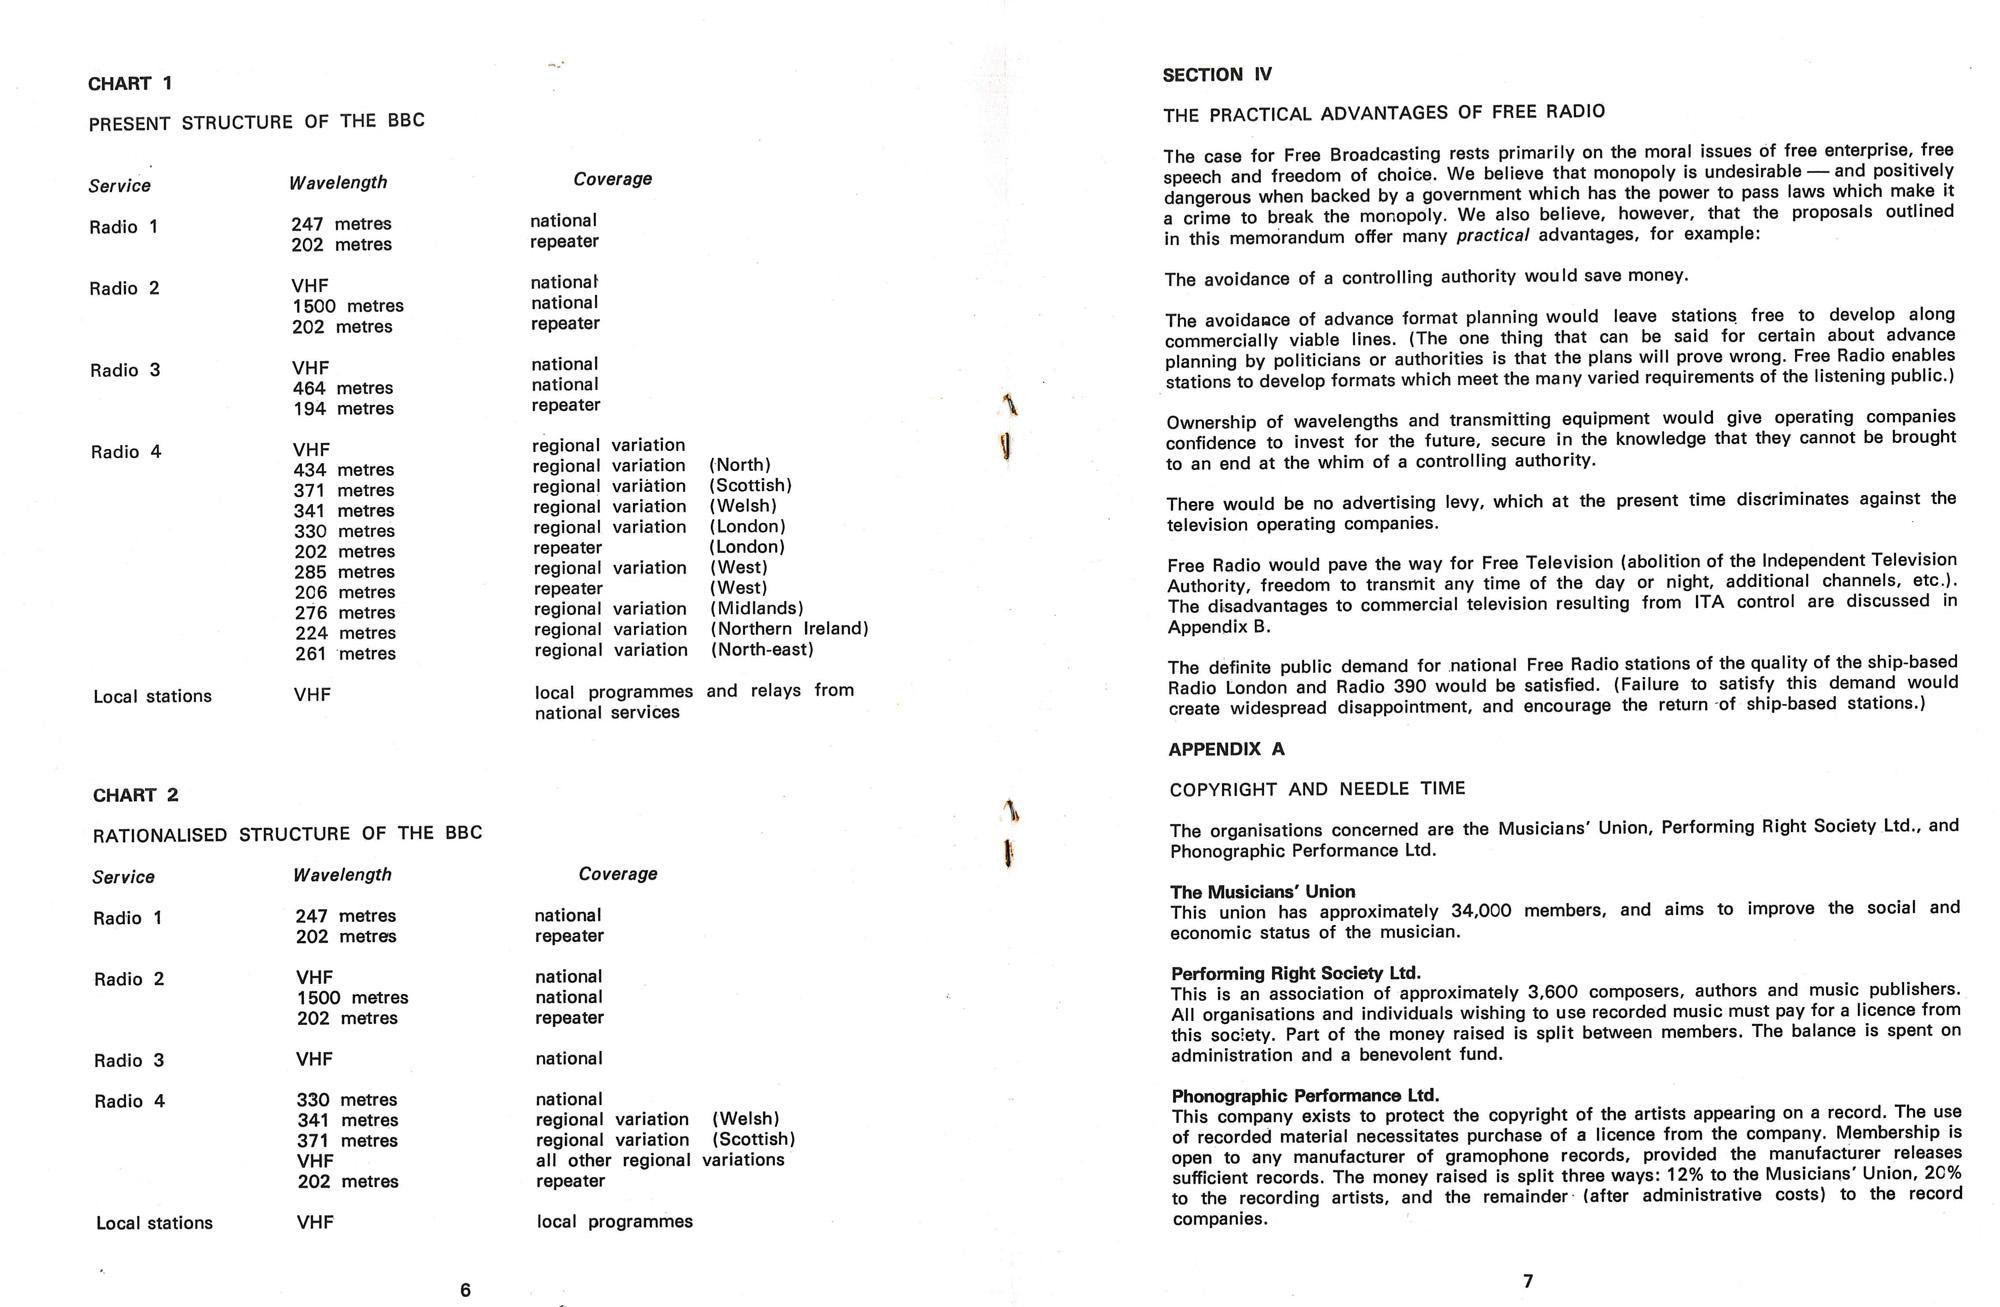 19701016 FRA the future of commercial broadcasting in the UK 05.jpg